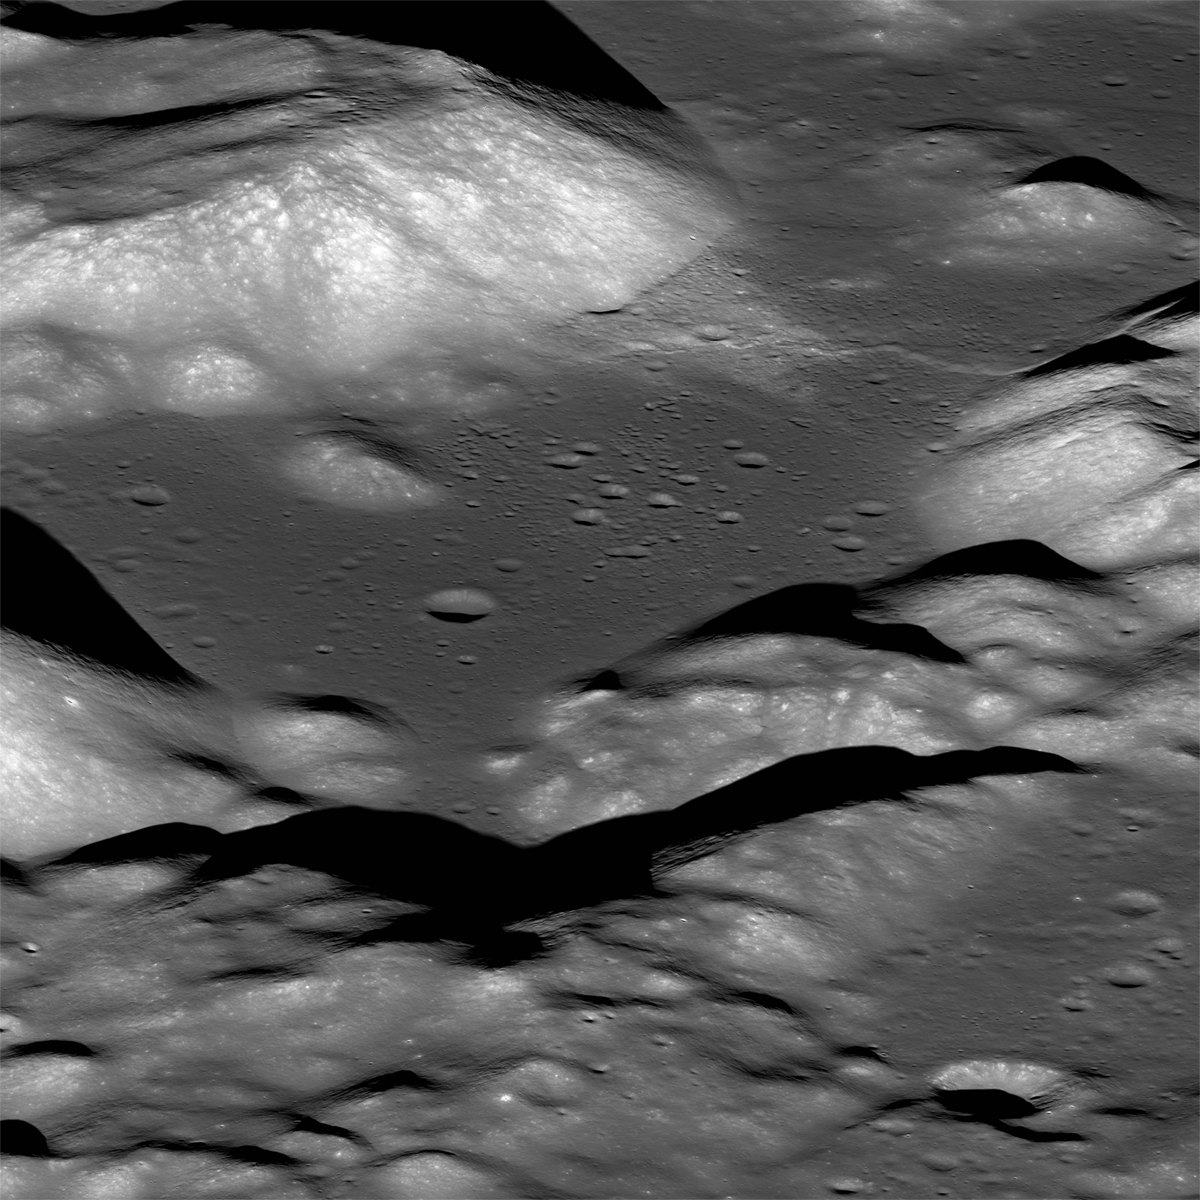 Taurus Littrow Valley from the east